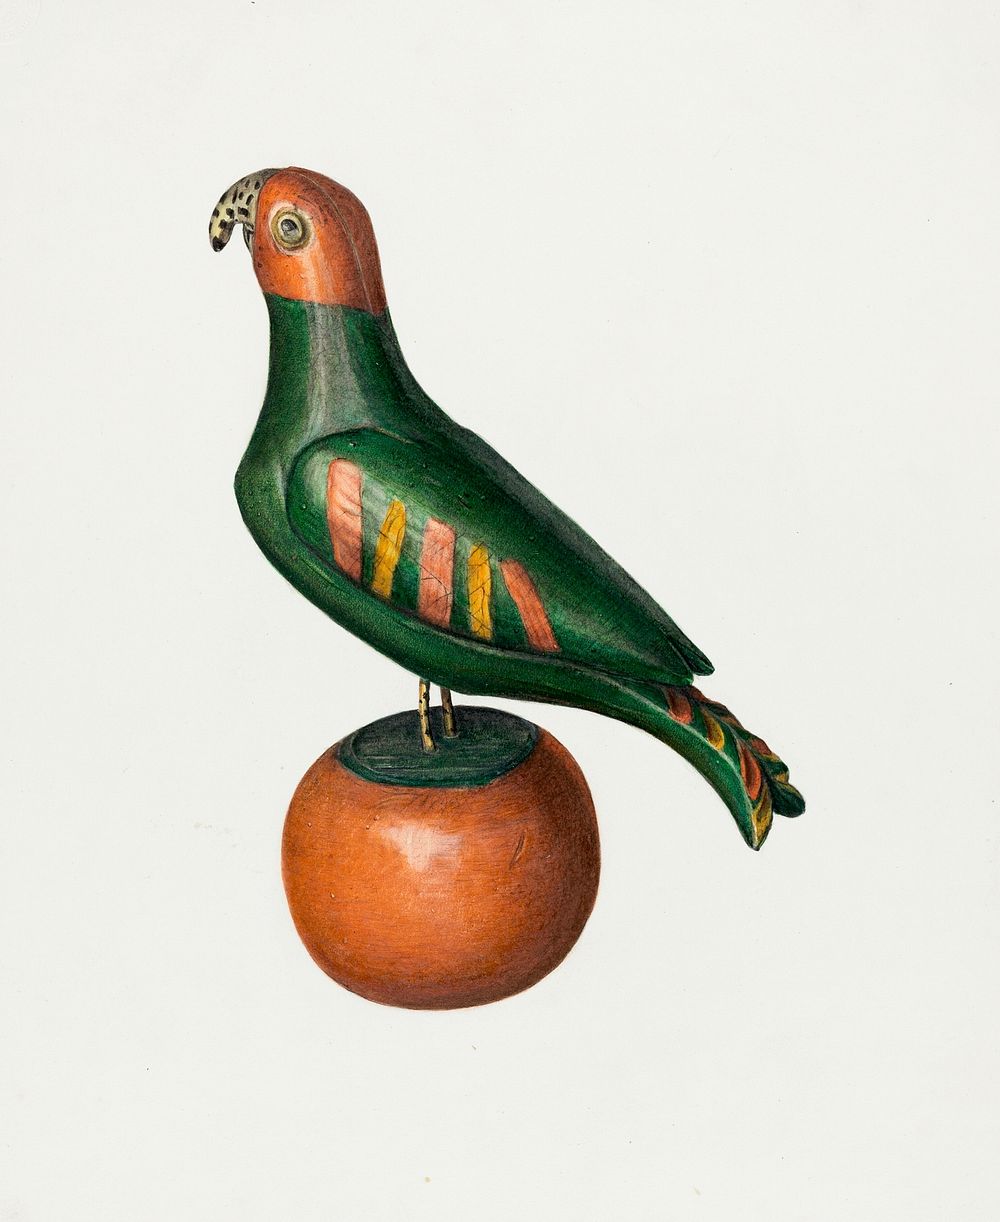 Pa. German Parrot (1935&ndash;1942) by Mina Lowry. Original from The National Gallery of Art. Digitally enhanced by rawpixel.